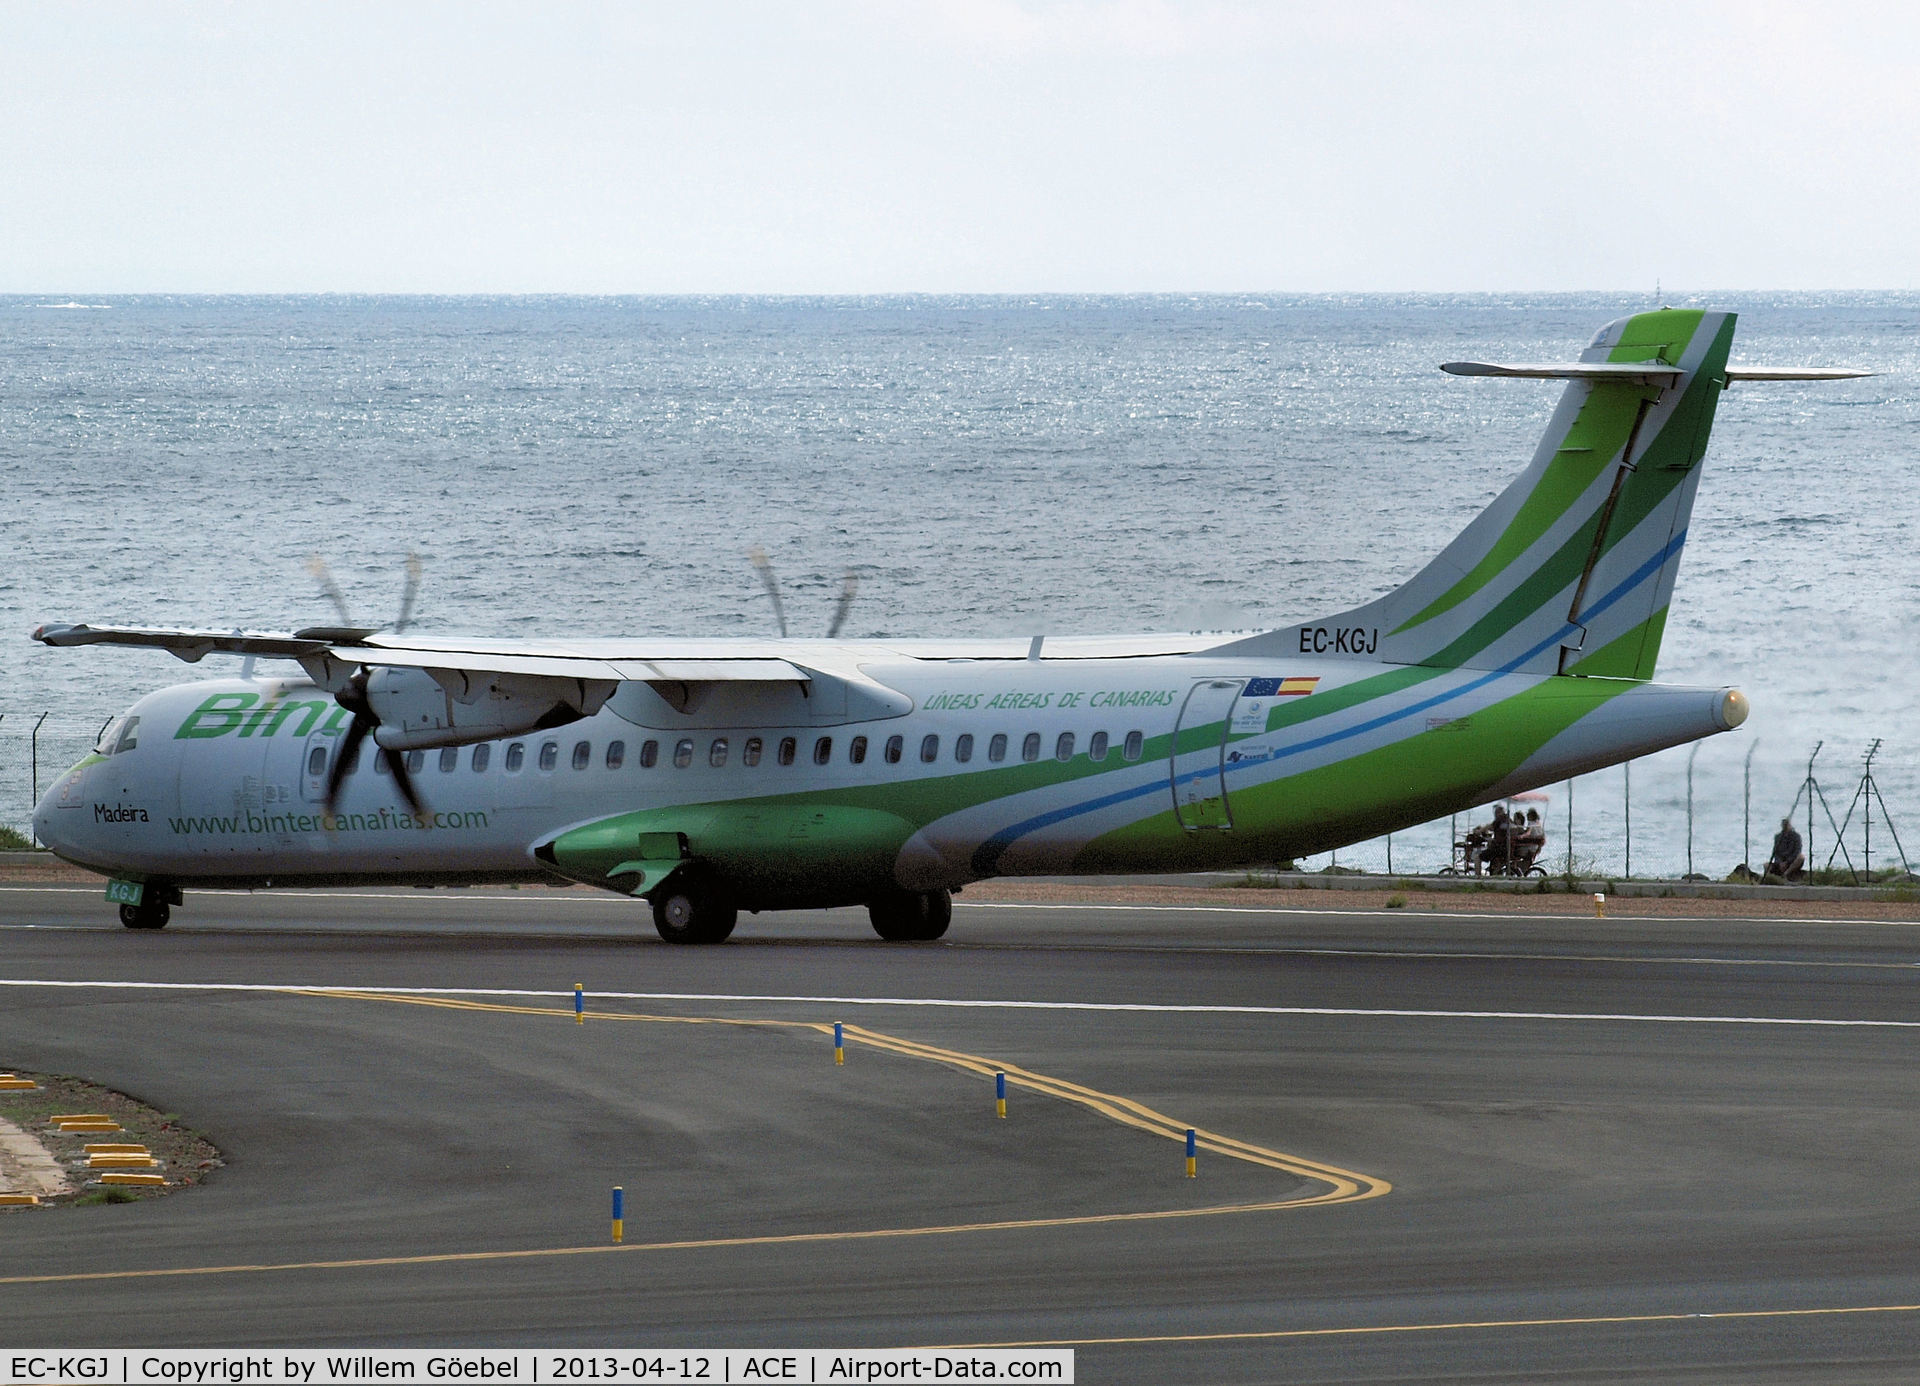 EC-KGJ, 2007 ATR 72-212A C/N 753, taxi to the runway of Lanzarote airport